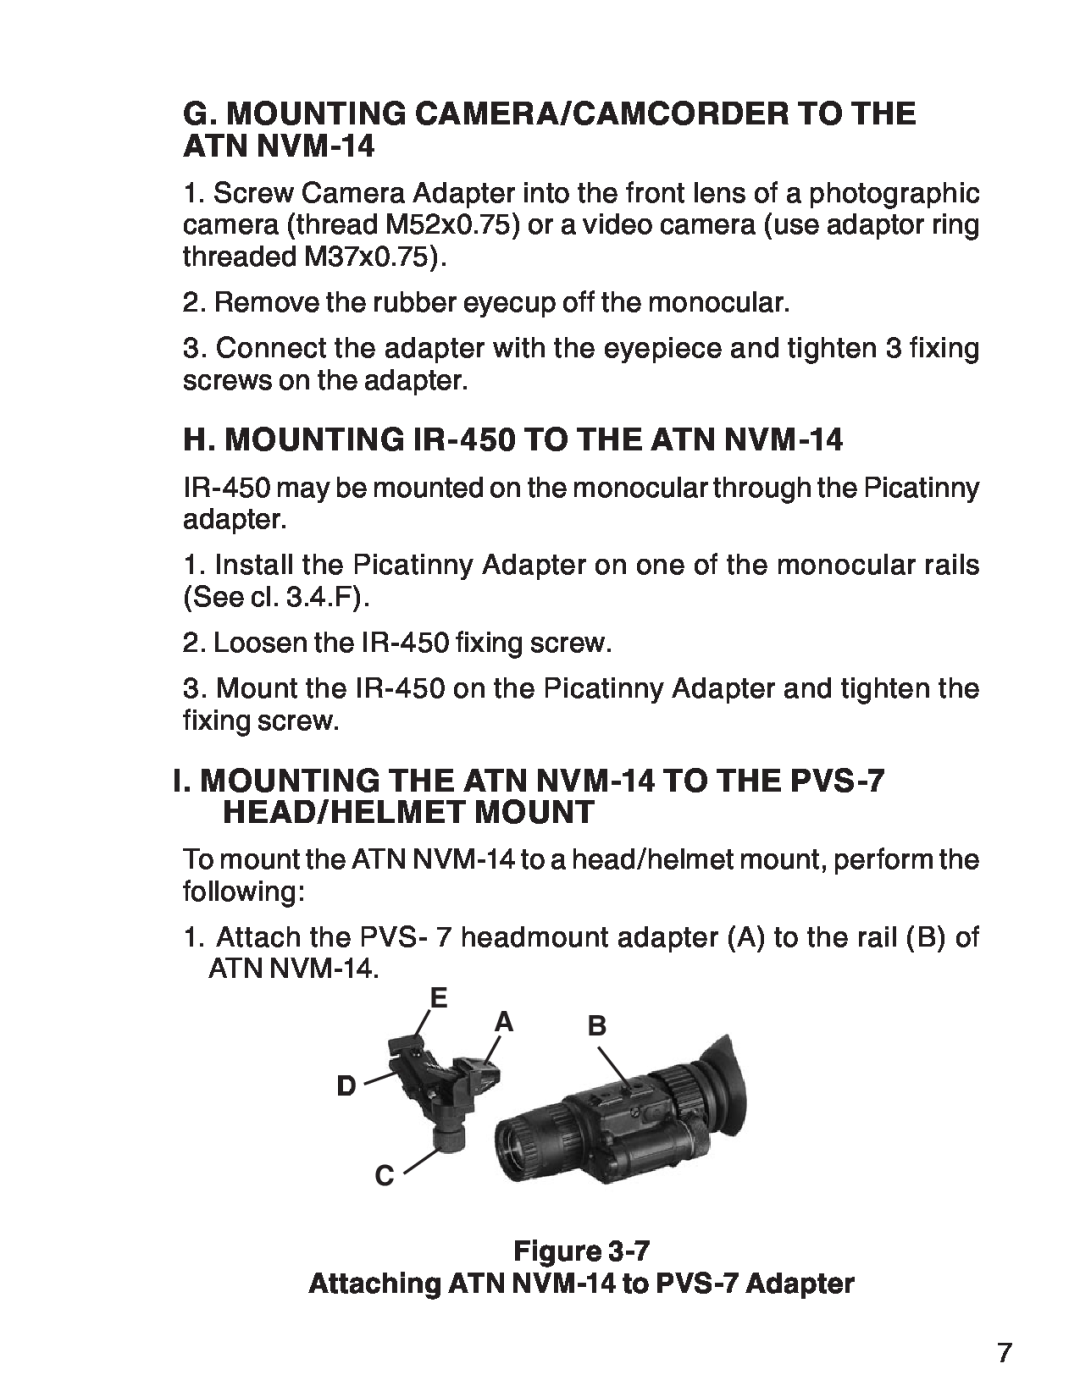 ATN 3 manual G. Mounting Camera/Camcorder to the ATN NVM-14, H. Mounting IR-450 to the ATN NVM-14, E D C 